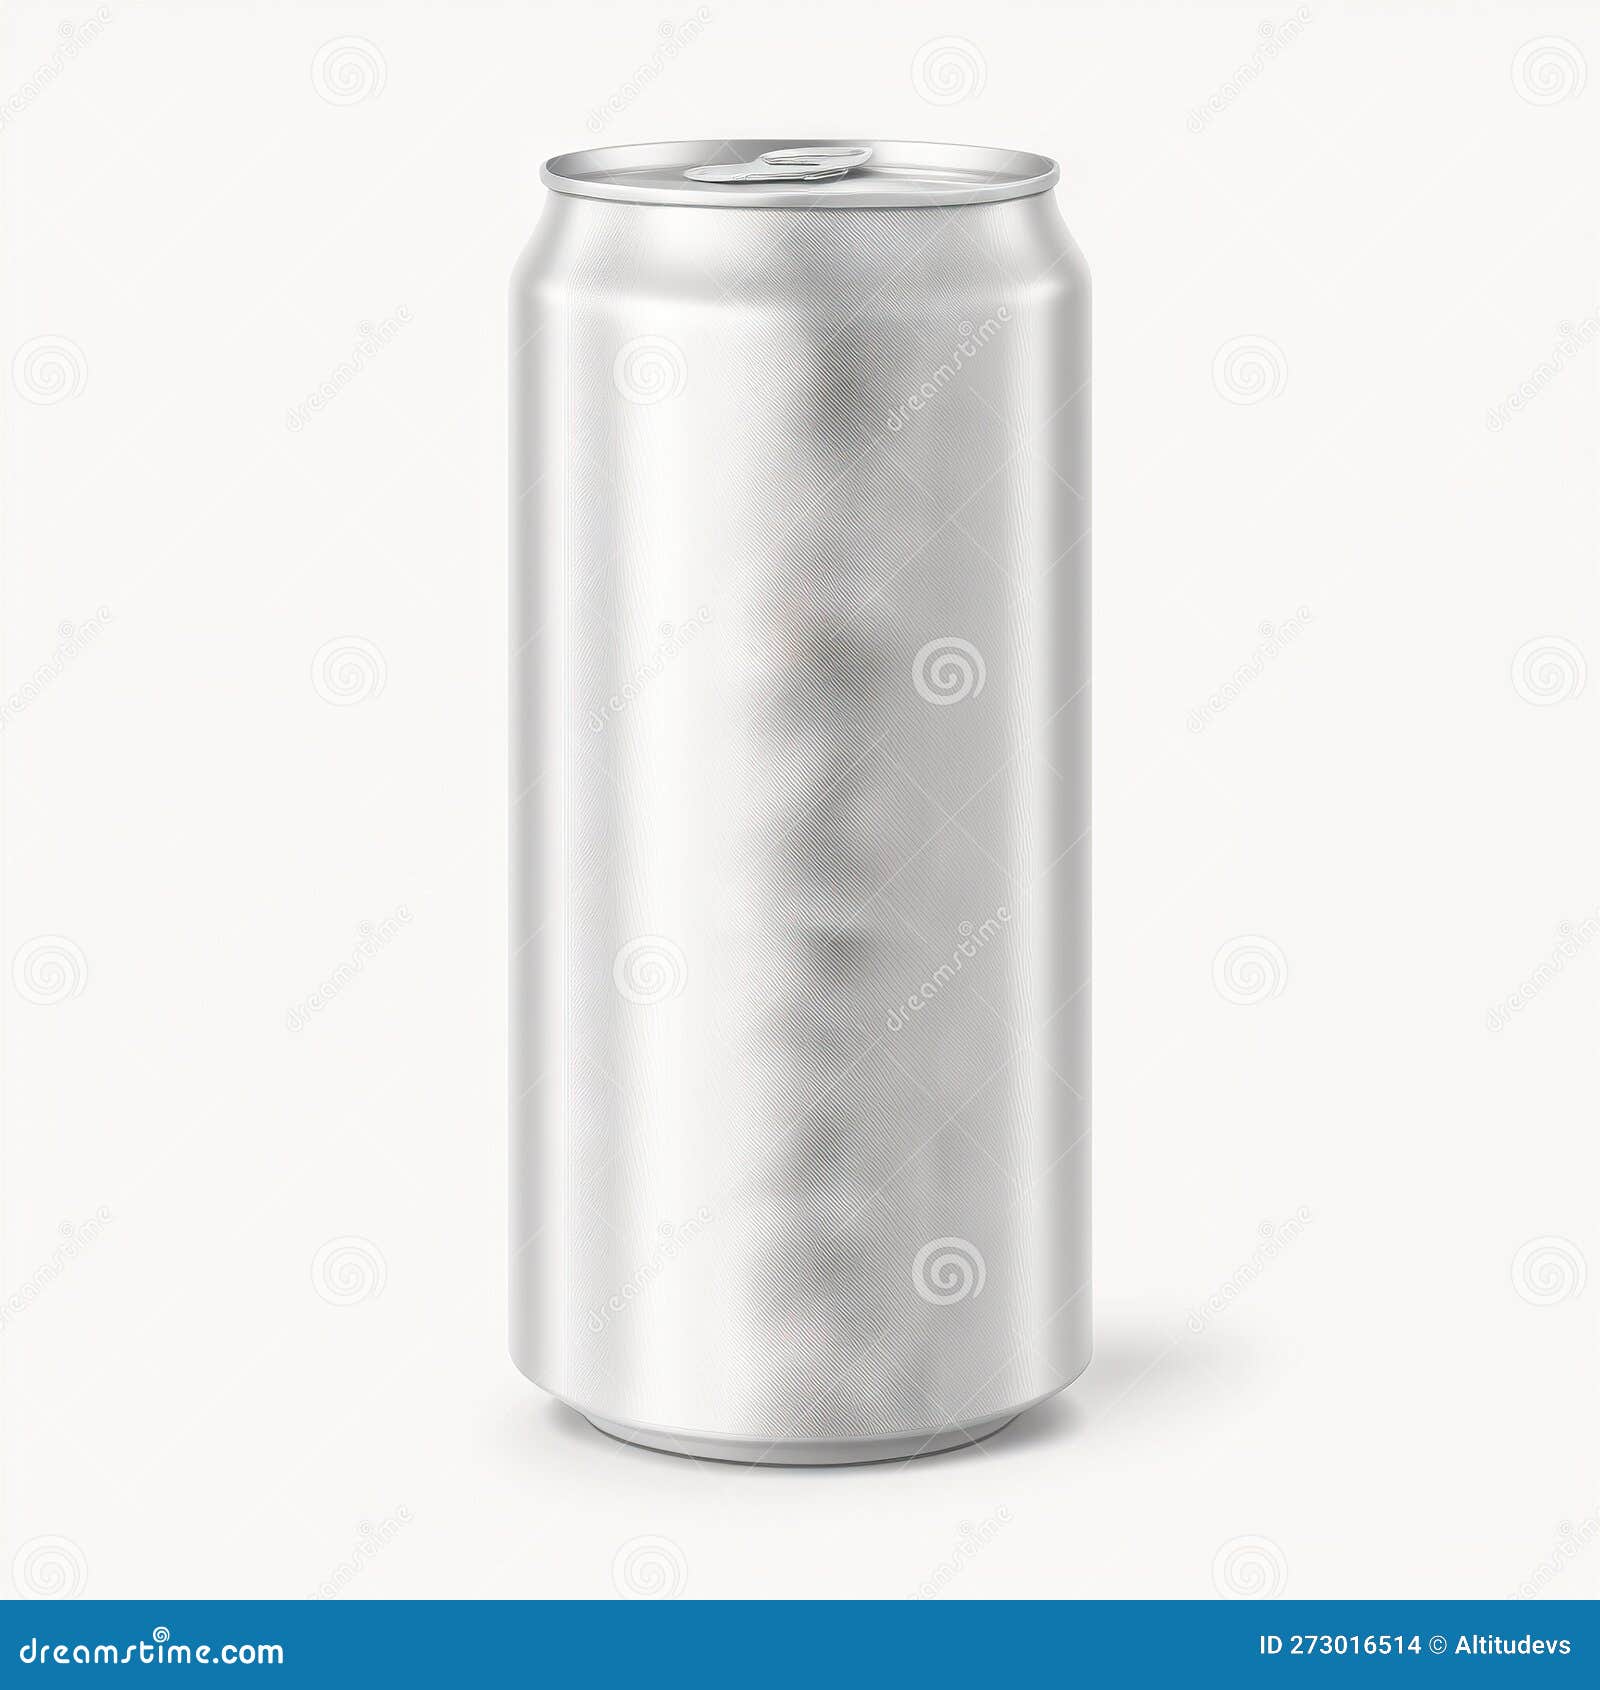 Empty Aluminum Cans Mockup of Suitable Volume for Effervescent Drinks ...